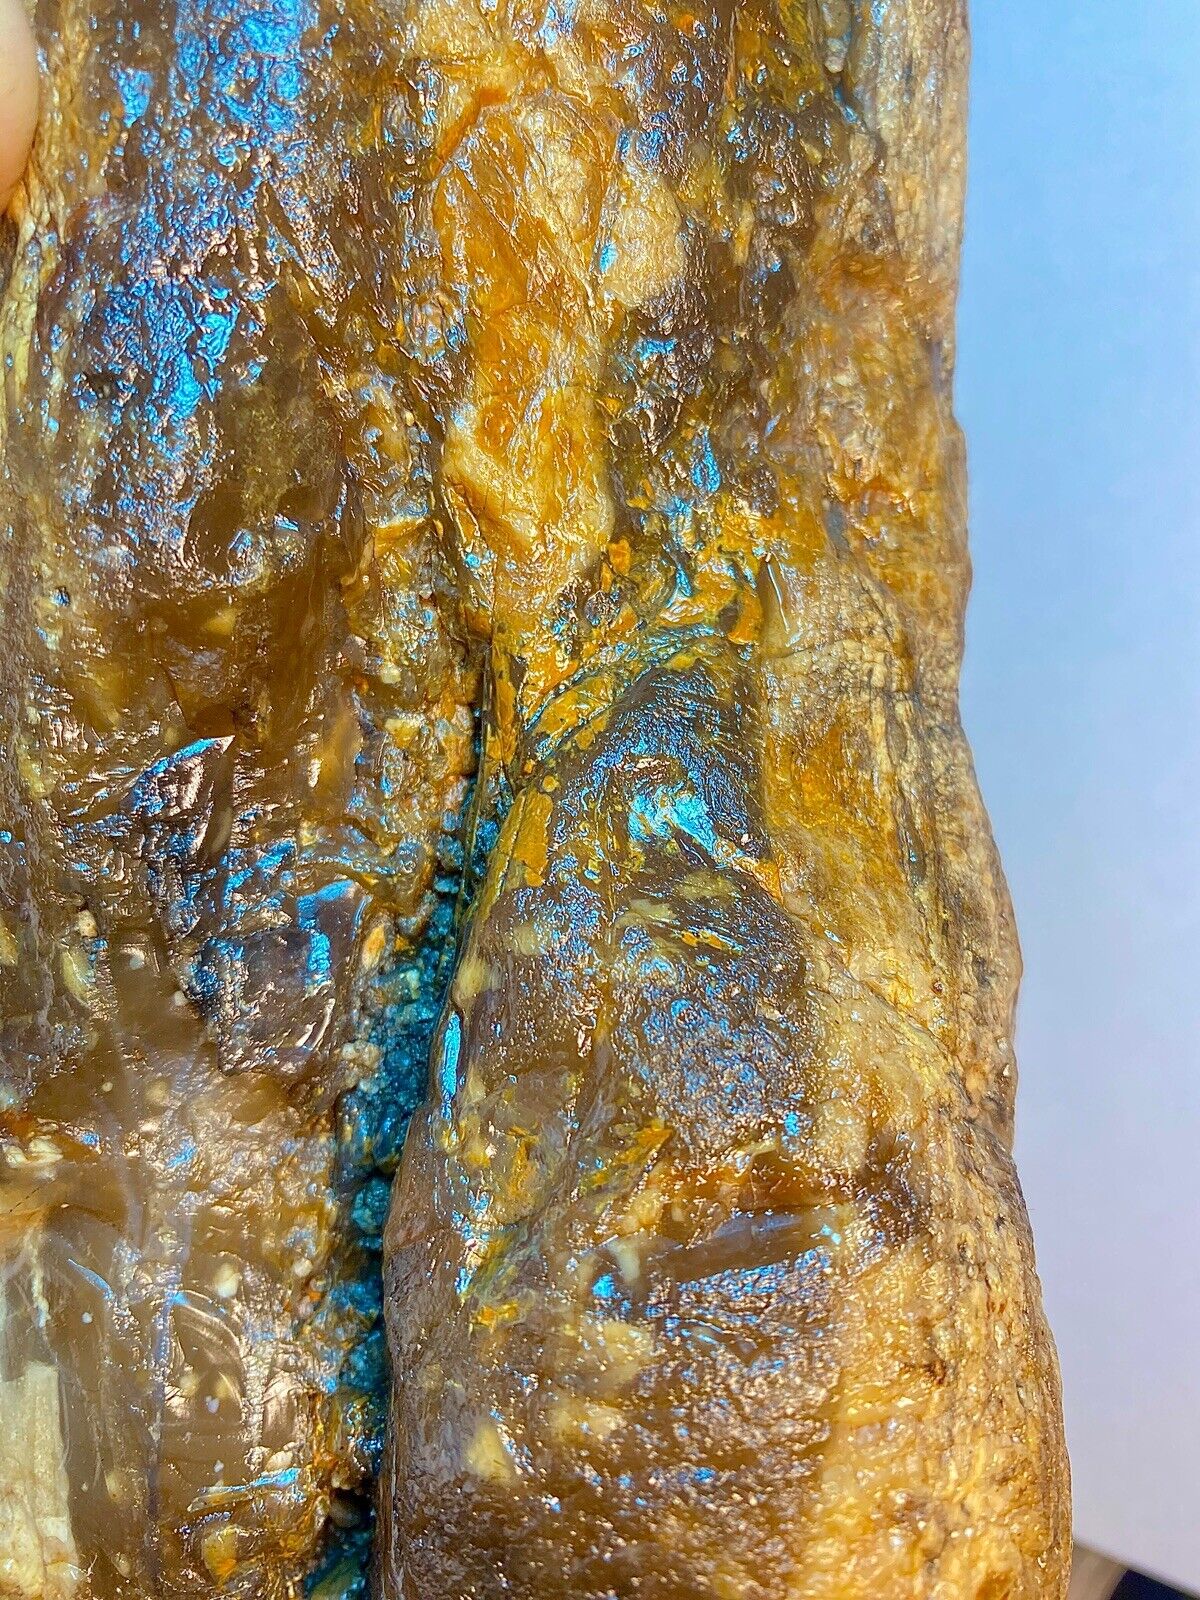 Huge 1 of A Kind Opalized Fossil Wood Nodule Super Rare 14+ Lbs Slabs 4 Days